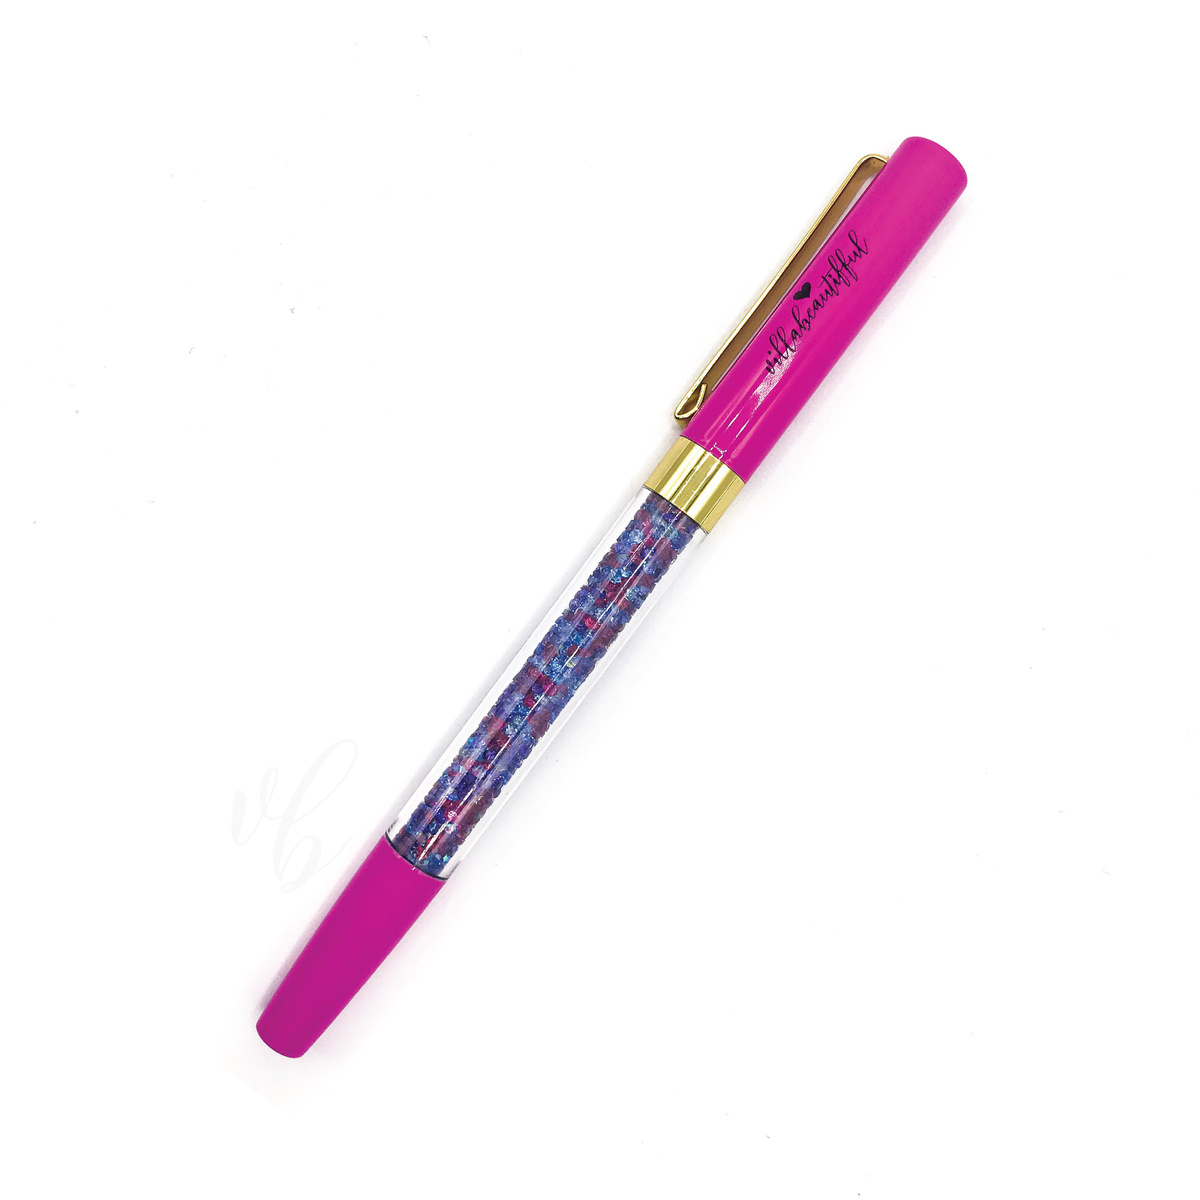 Berrylicious Imperfect Crystal VBPen | limited pen